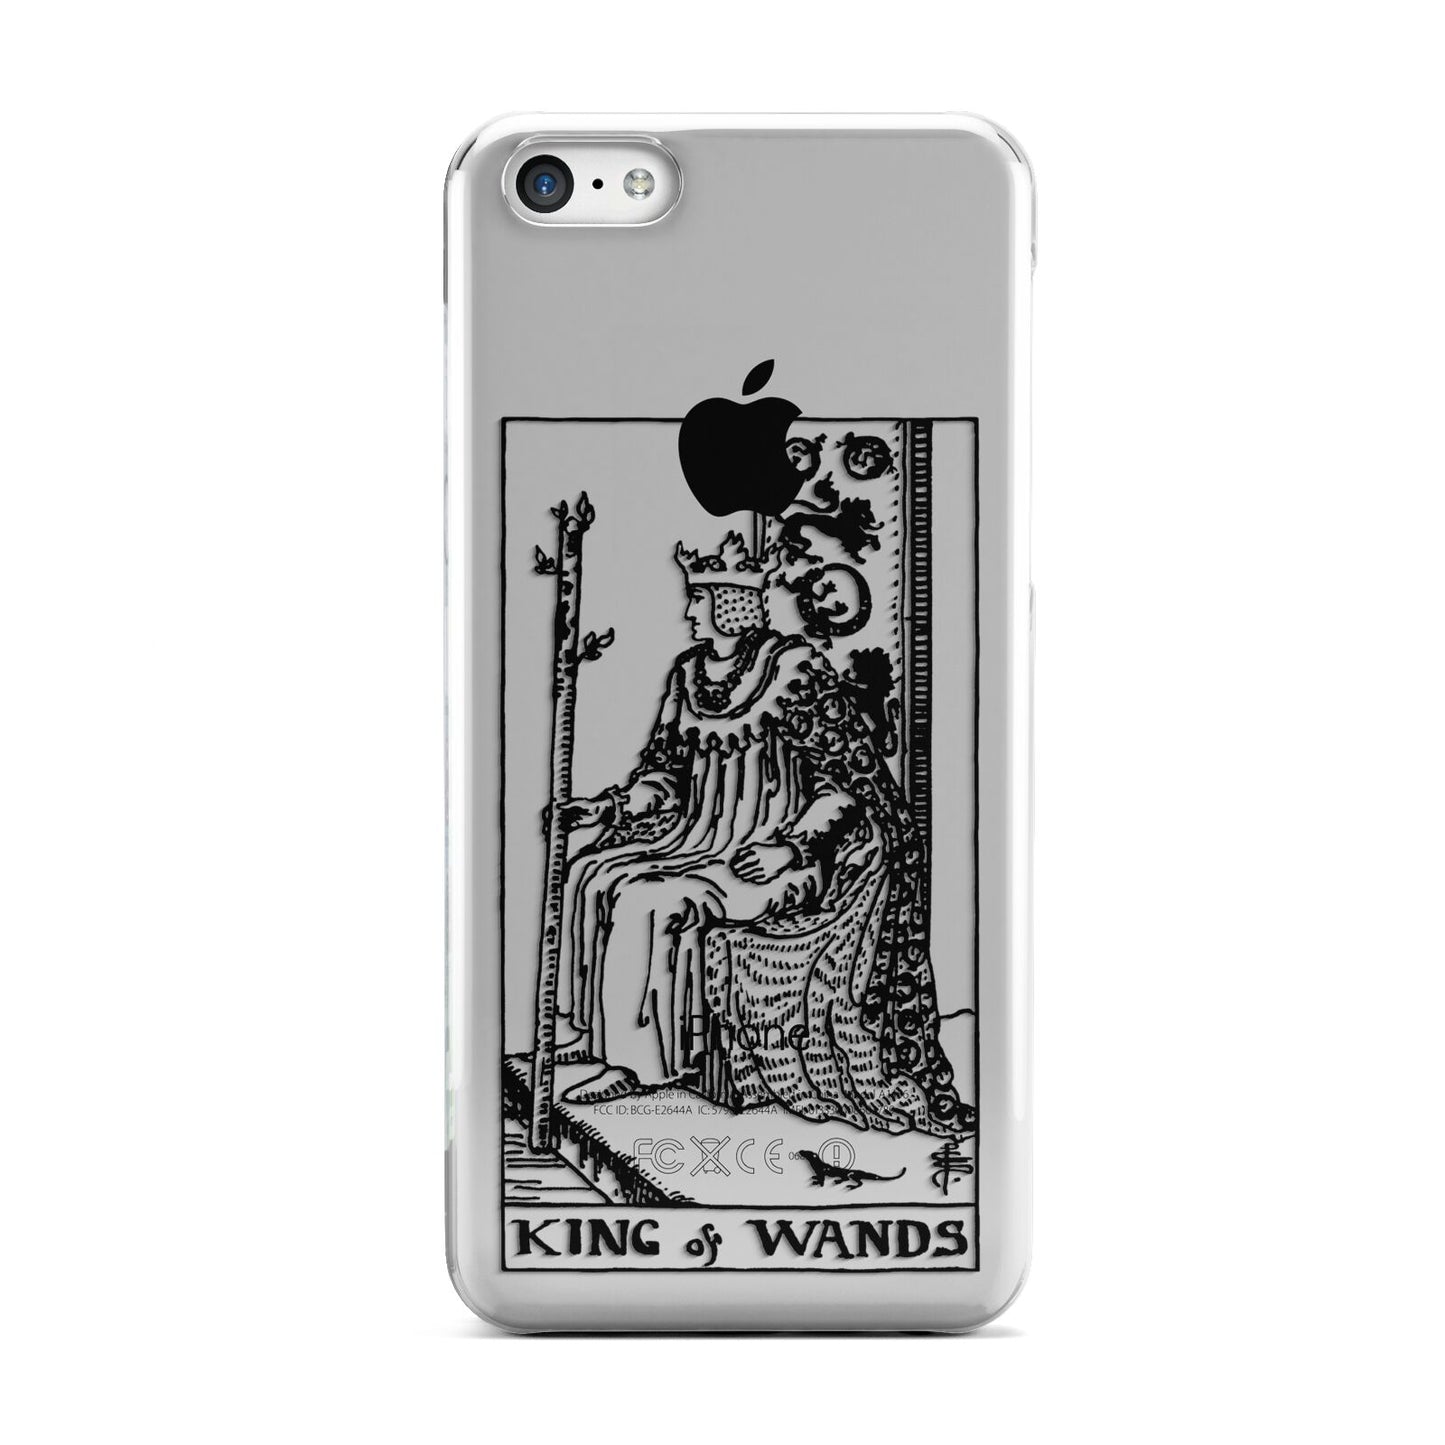 King of Wands Monochrome Apple iPhone 5c Case